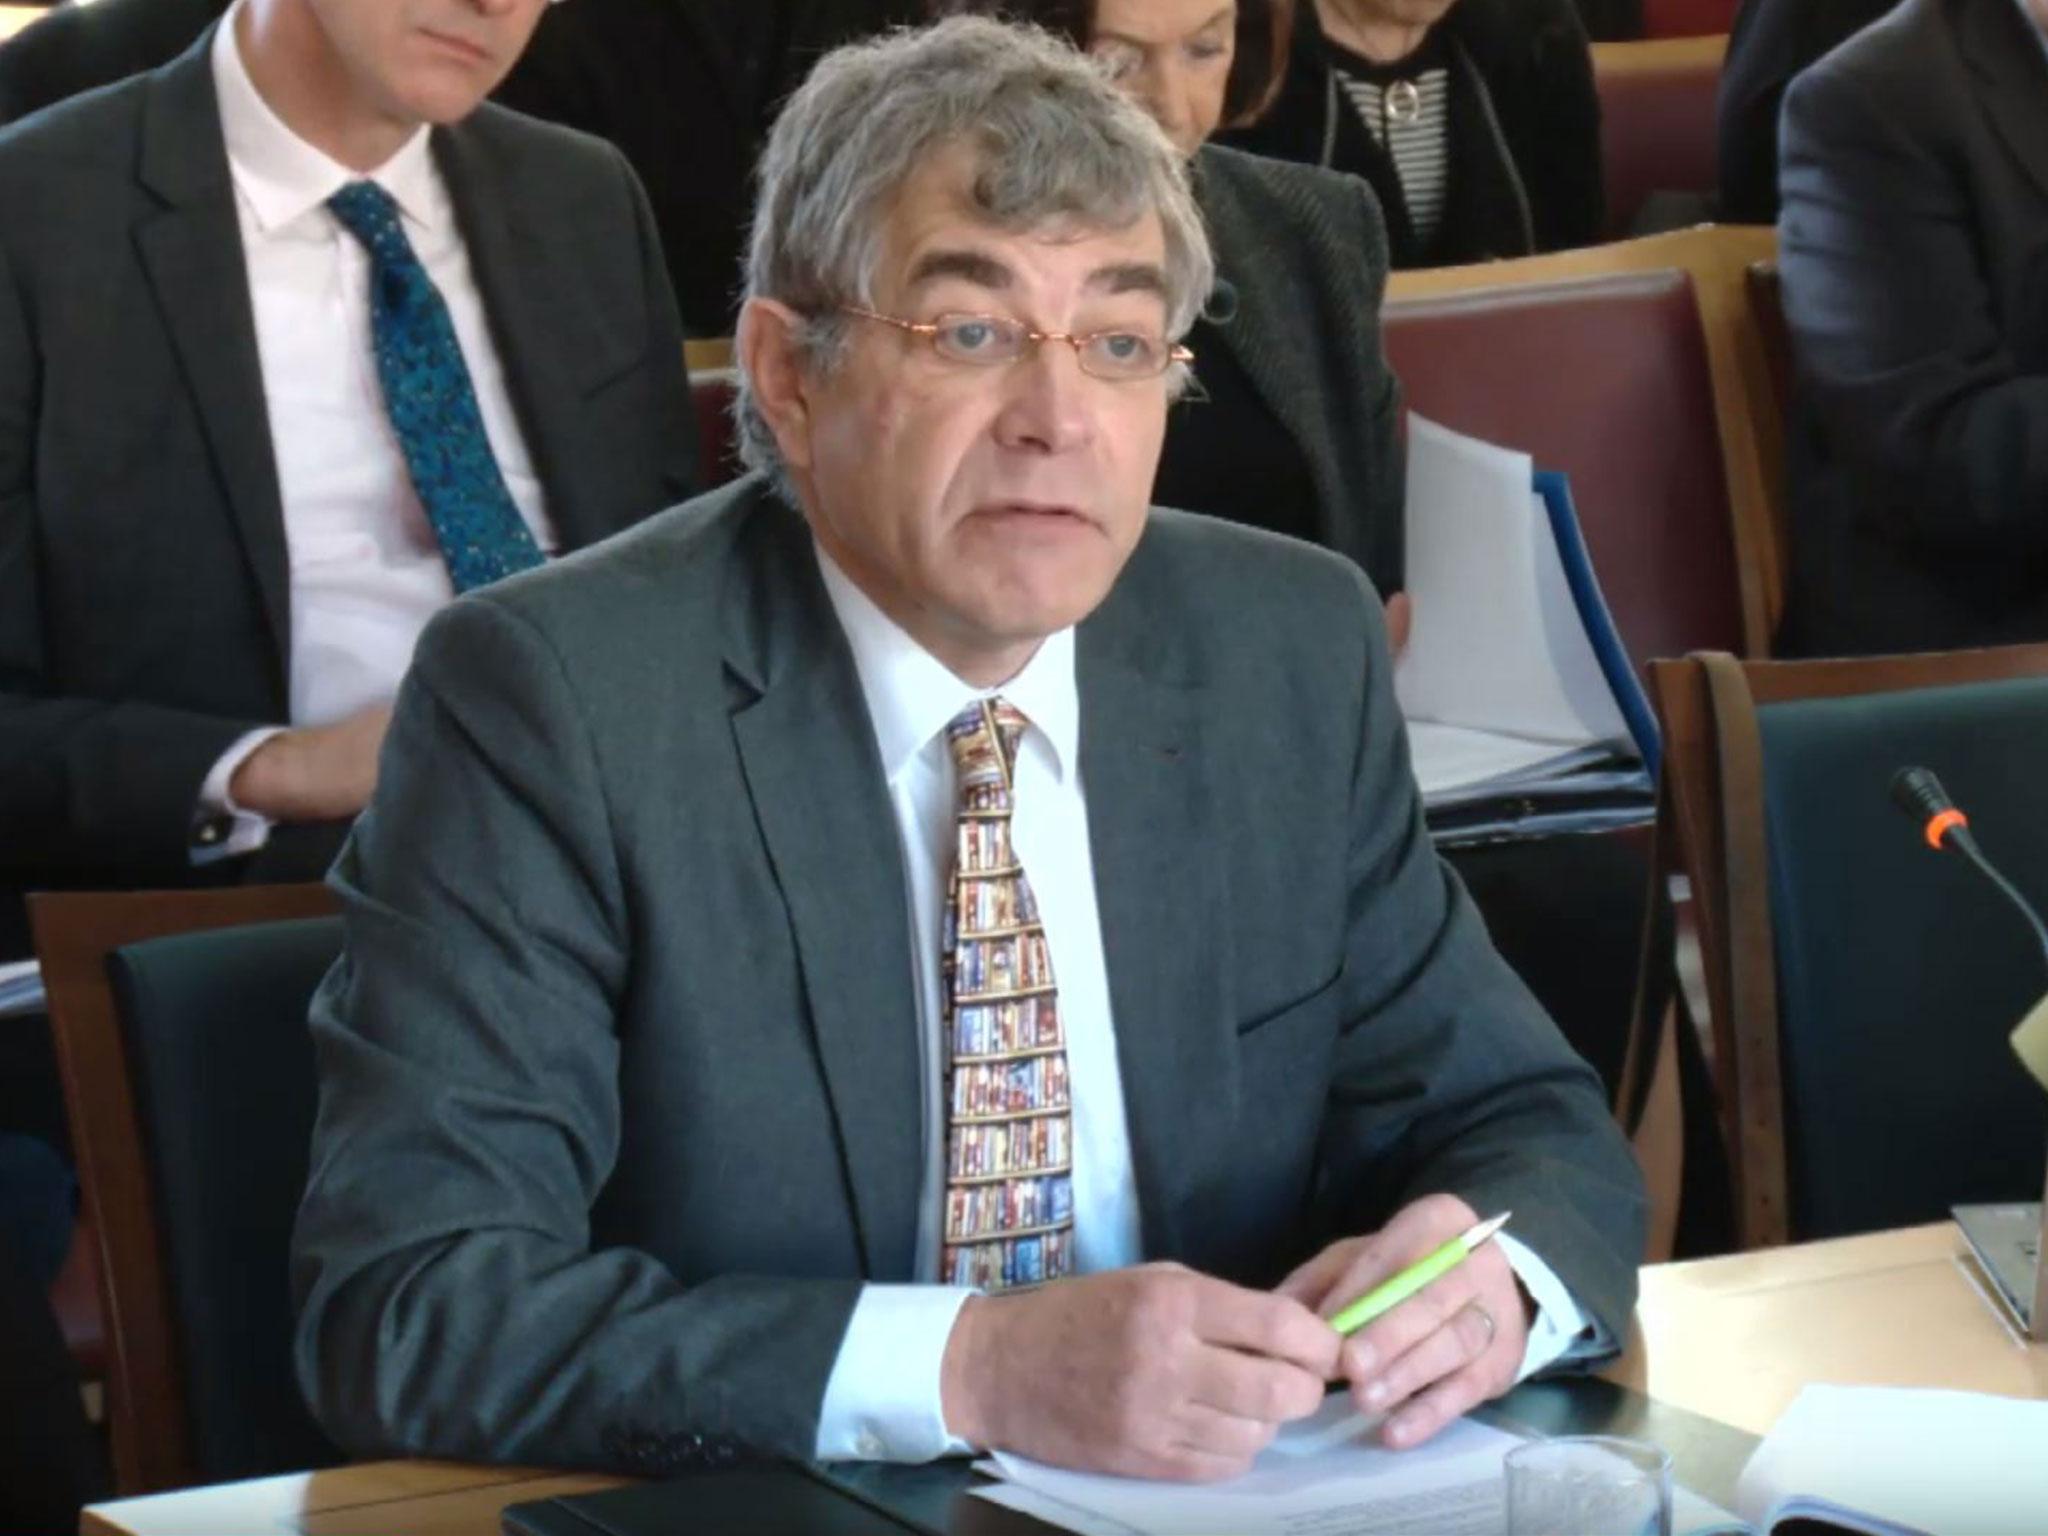 Alistair Fitt, vice-chancellor of Oxford Brookes University told the hearing that Brexit “would probably be the biggest disaster for the university sector in many years”